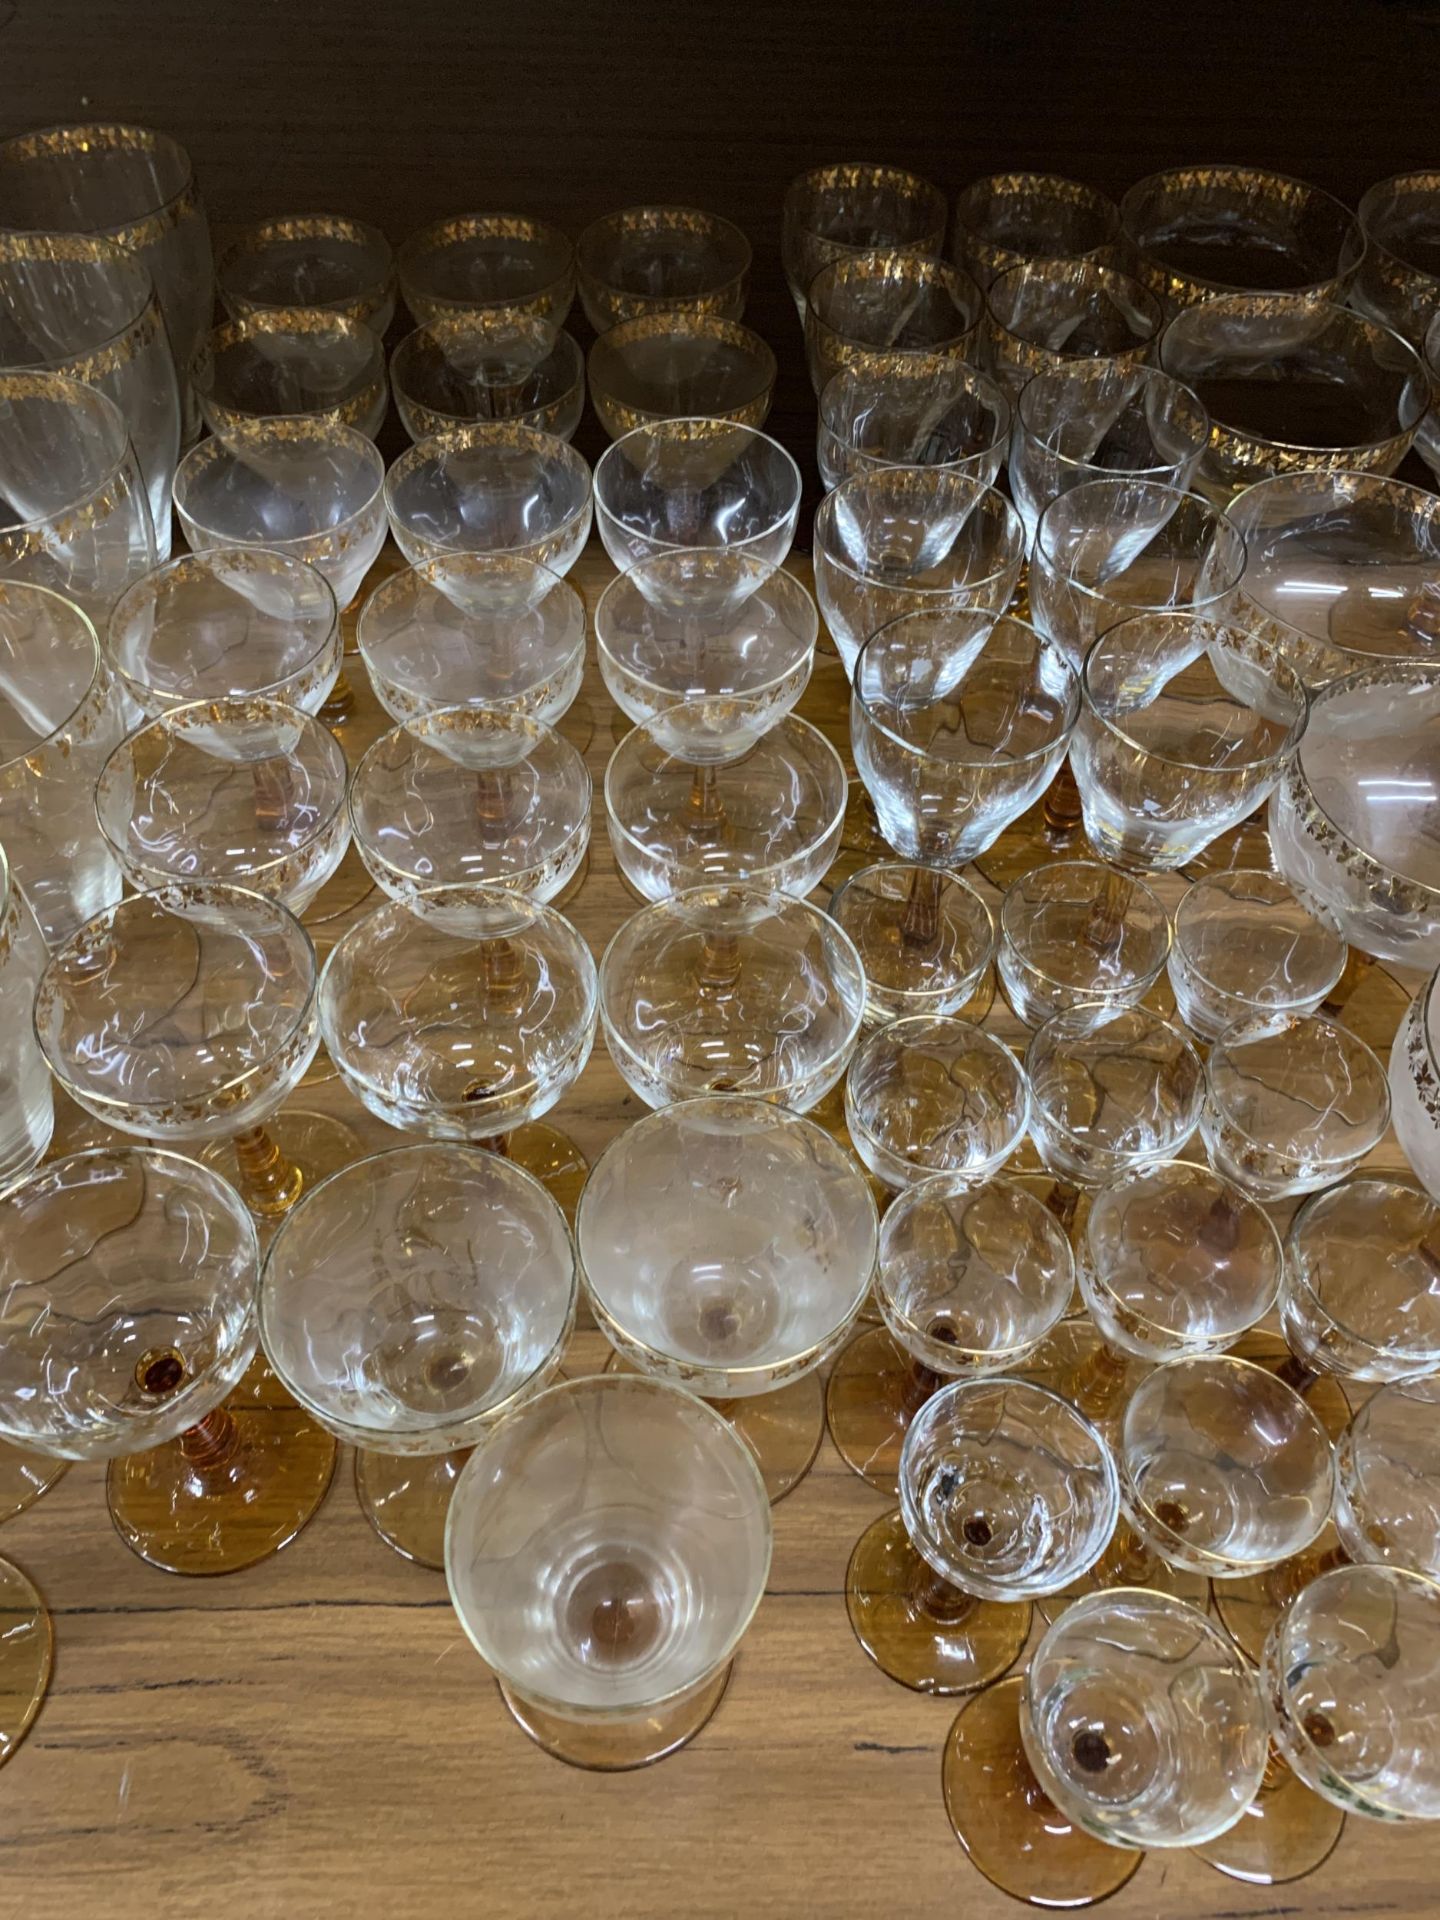 A VERY LARGE QUANTITY OF GLASSWARE TO INCLUDE SHERRY GLASSES, PORT GLASSES, CHAMPAGNE, ETC., - Image 3 of 8